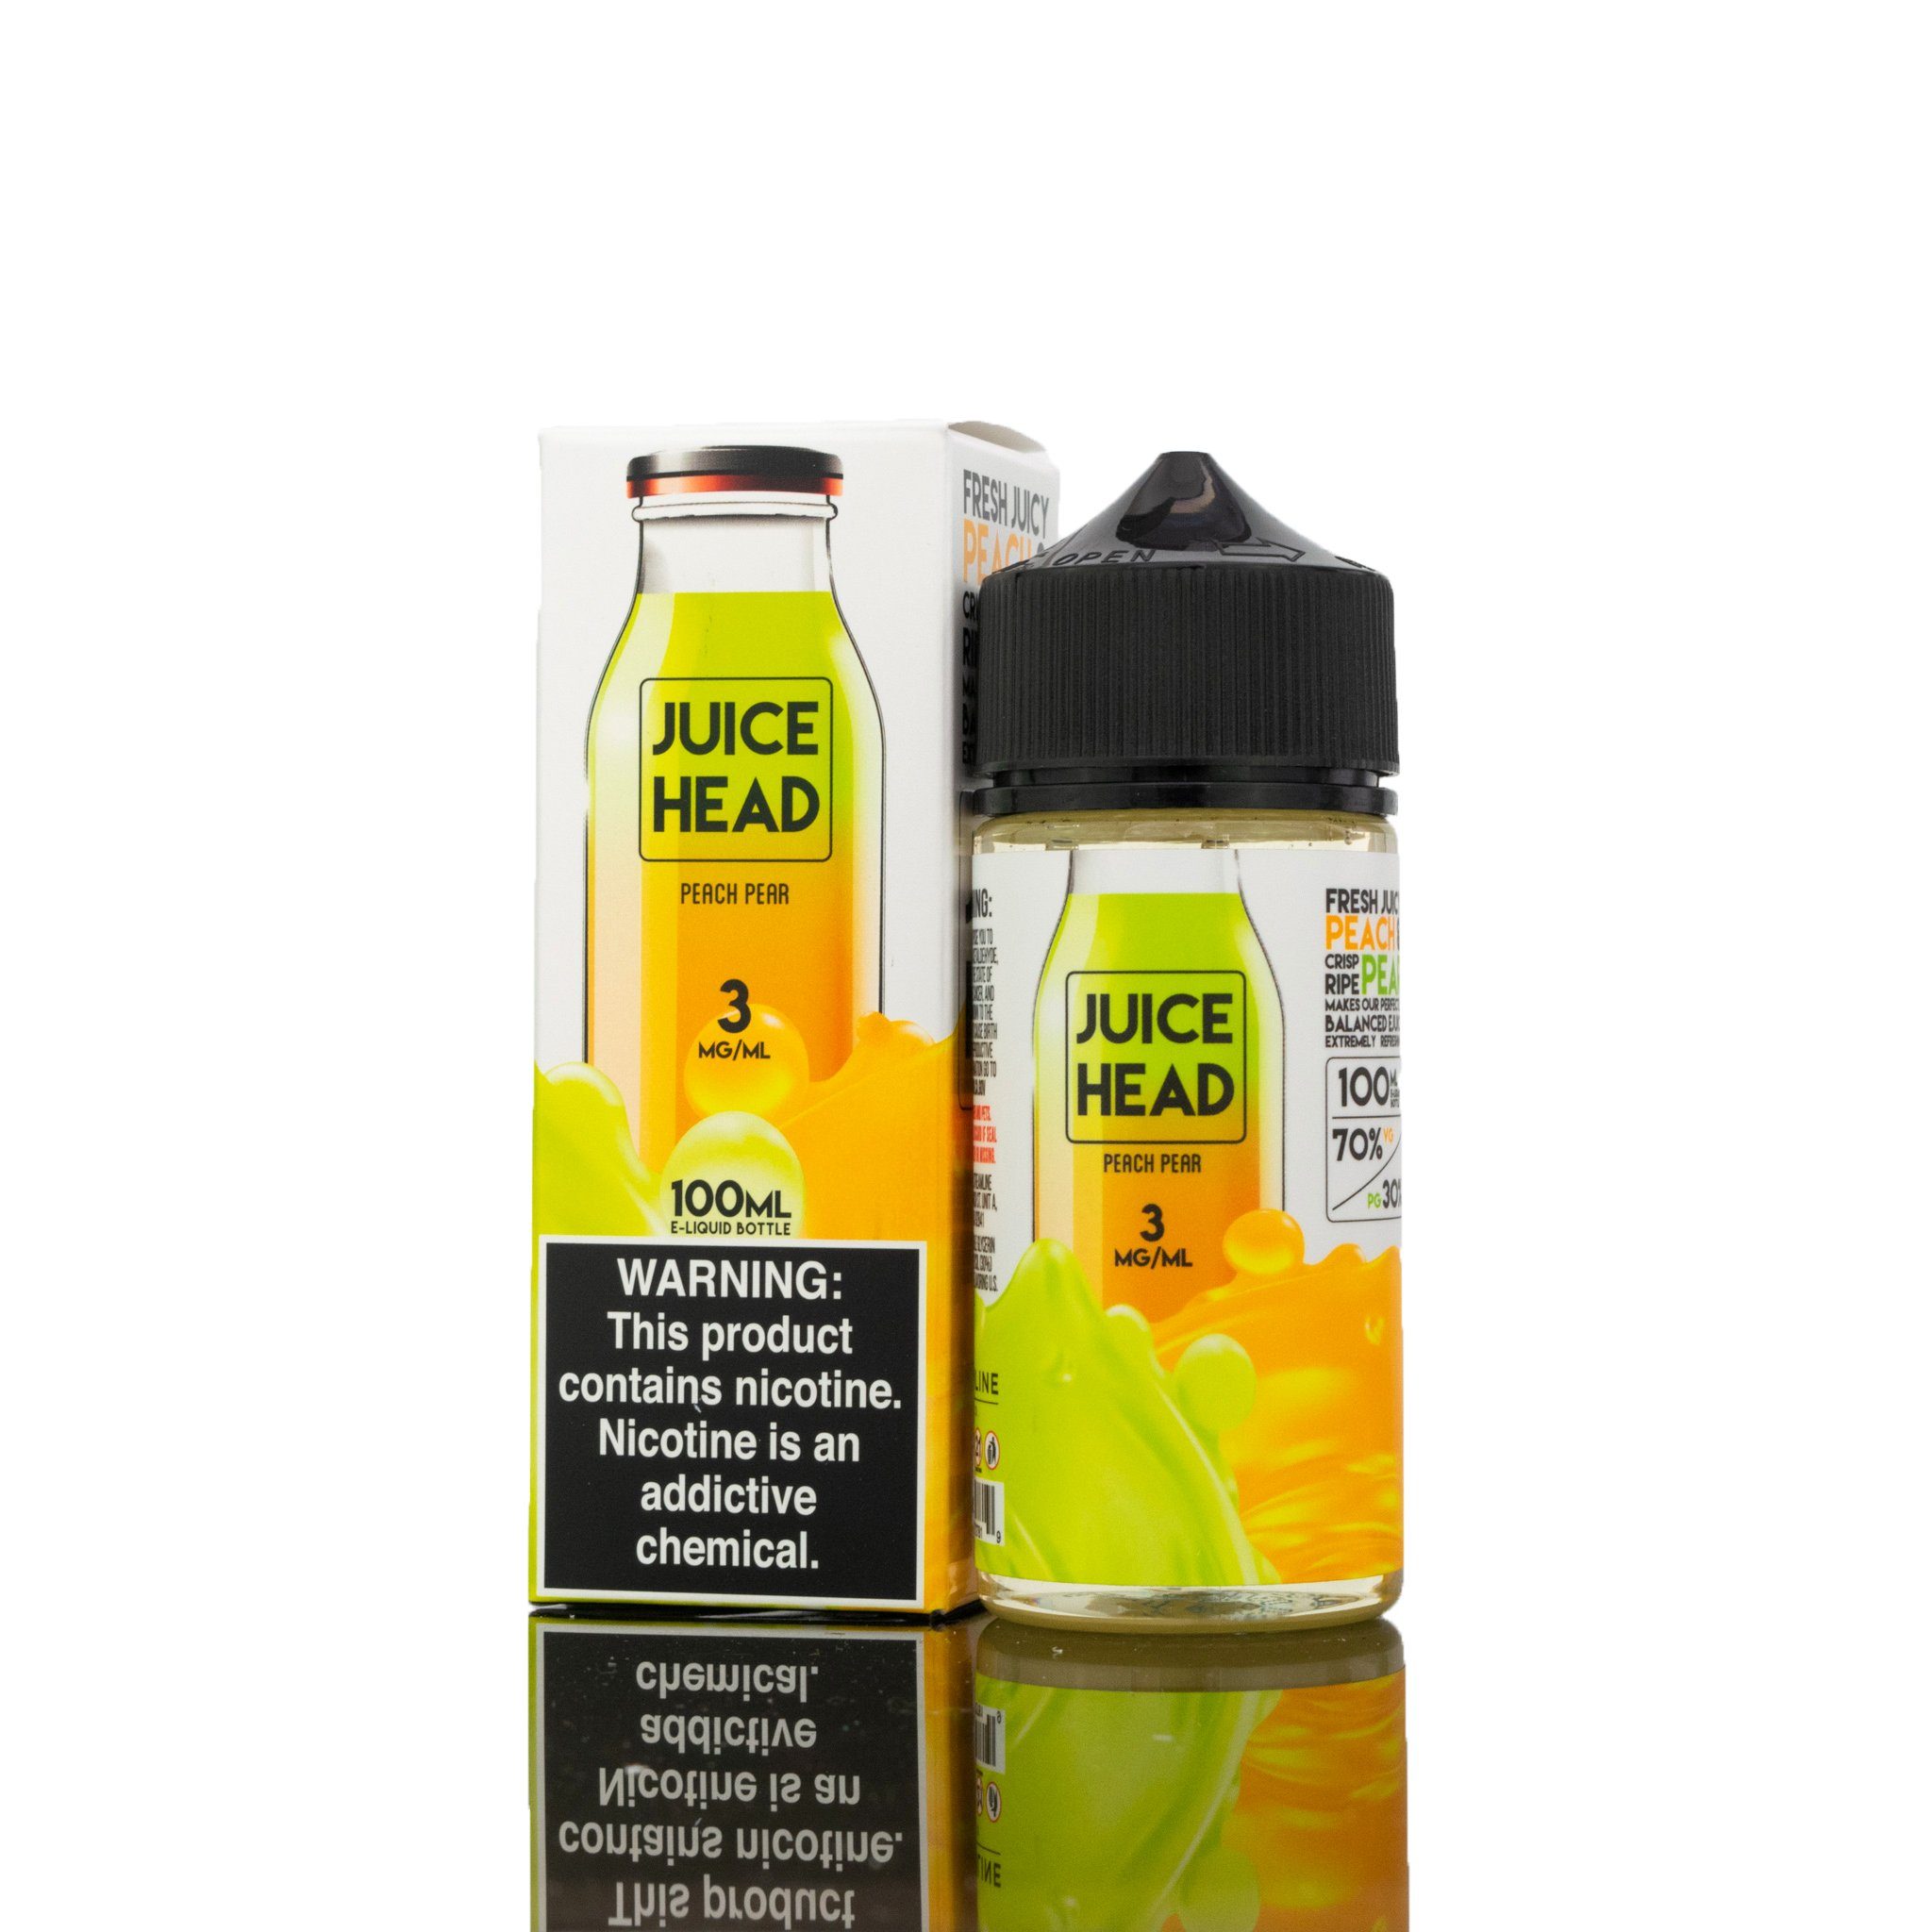 Peach Pear by Juice Head Series 100ml with Packaging